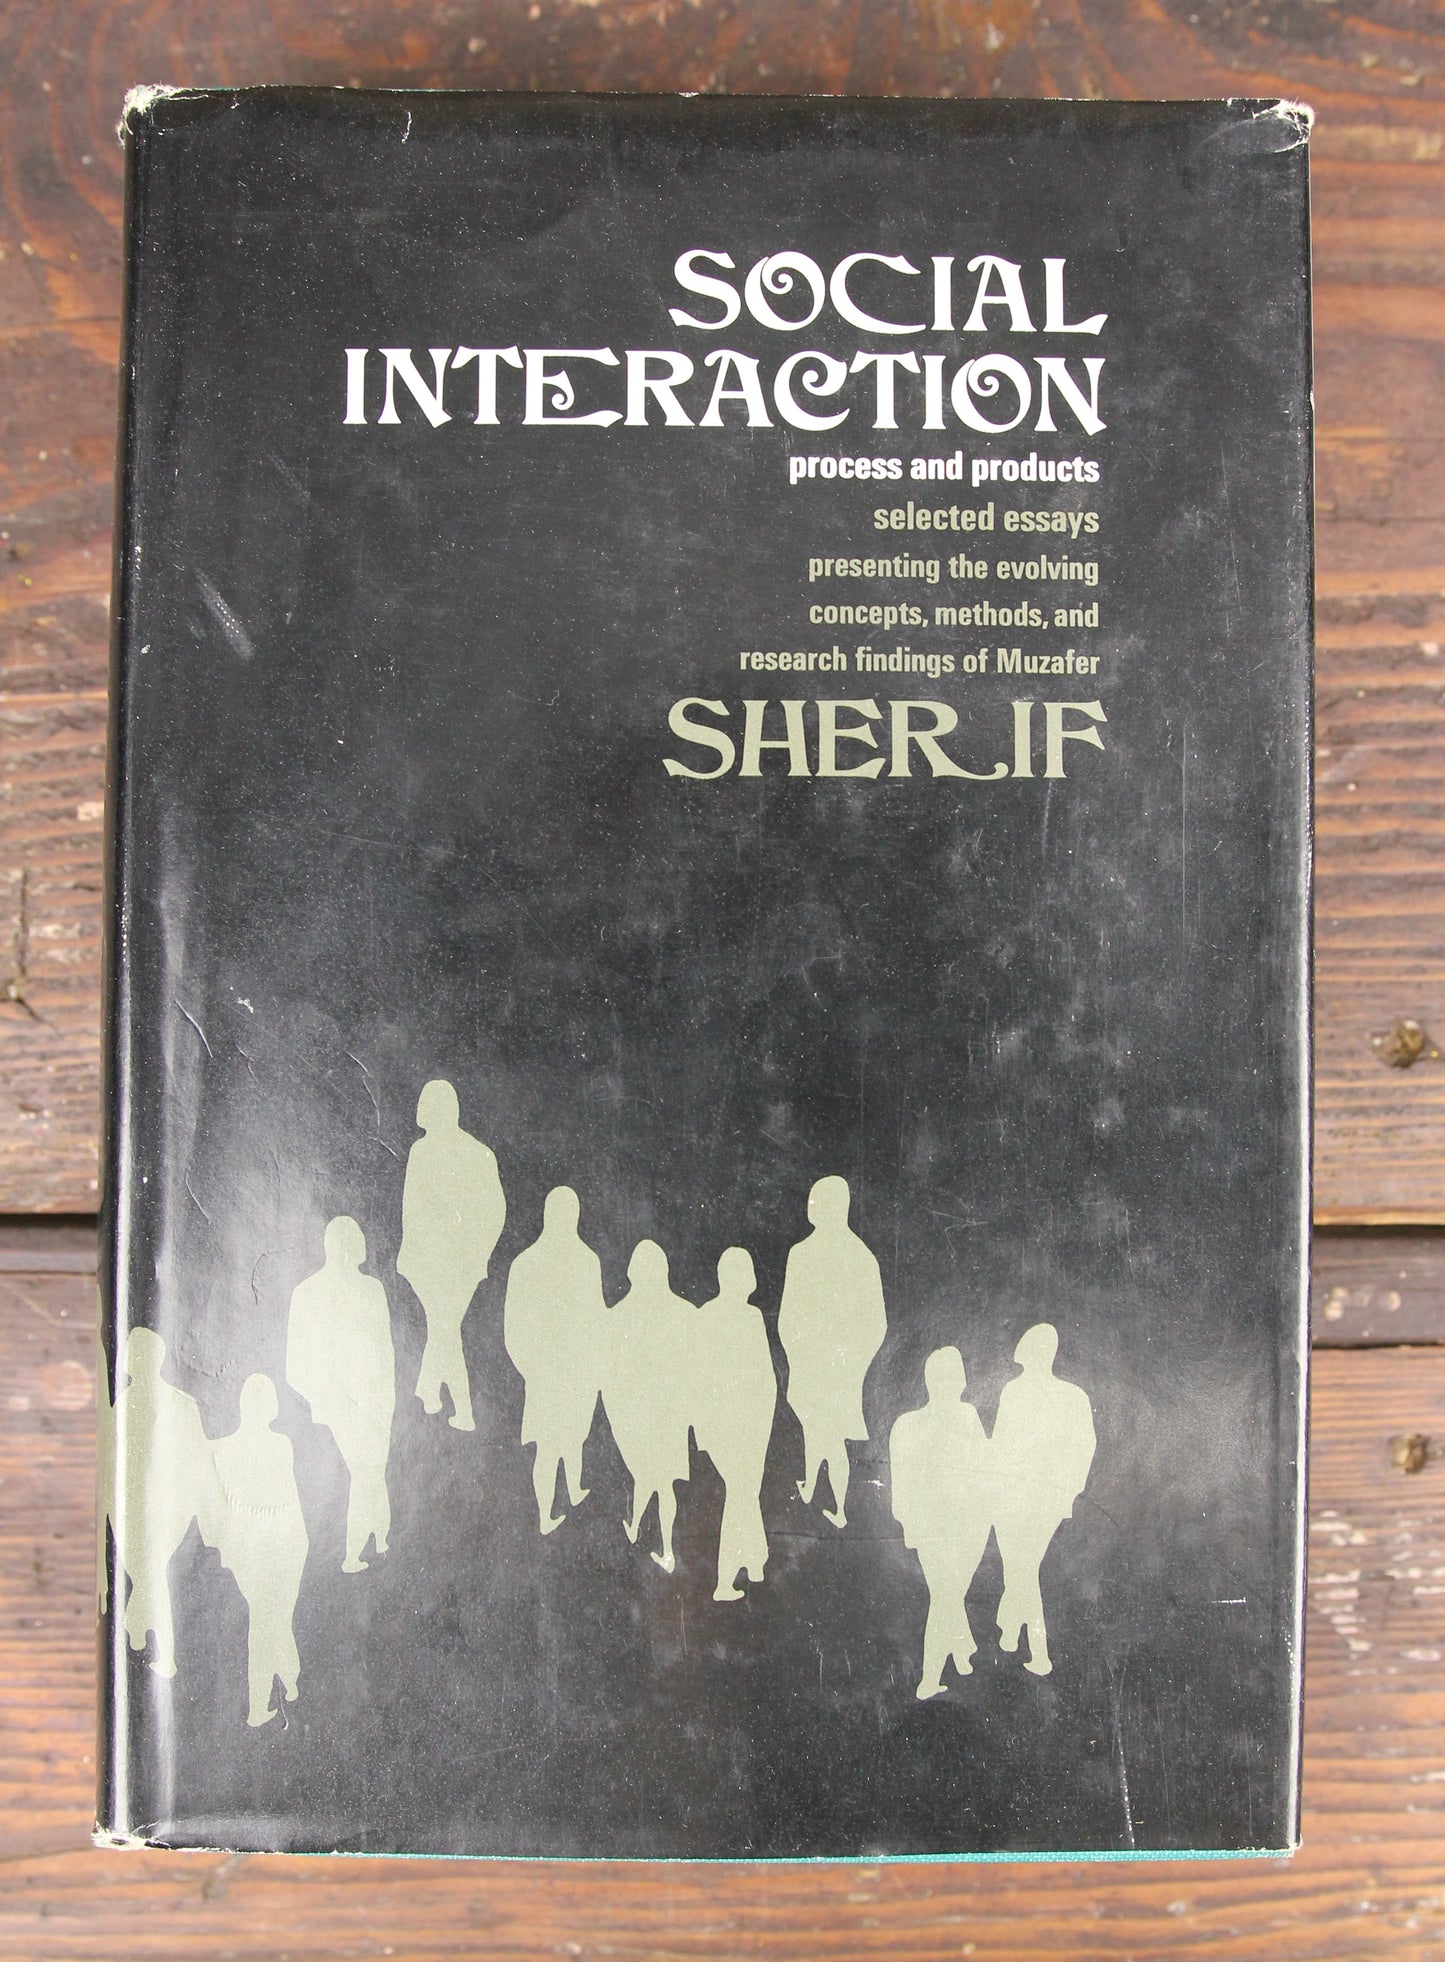 Social Interaction: Process and Products by Muzafar Sherif, Copyright 1967